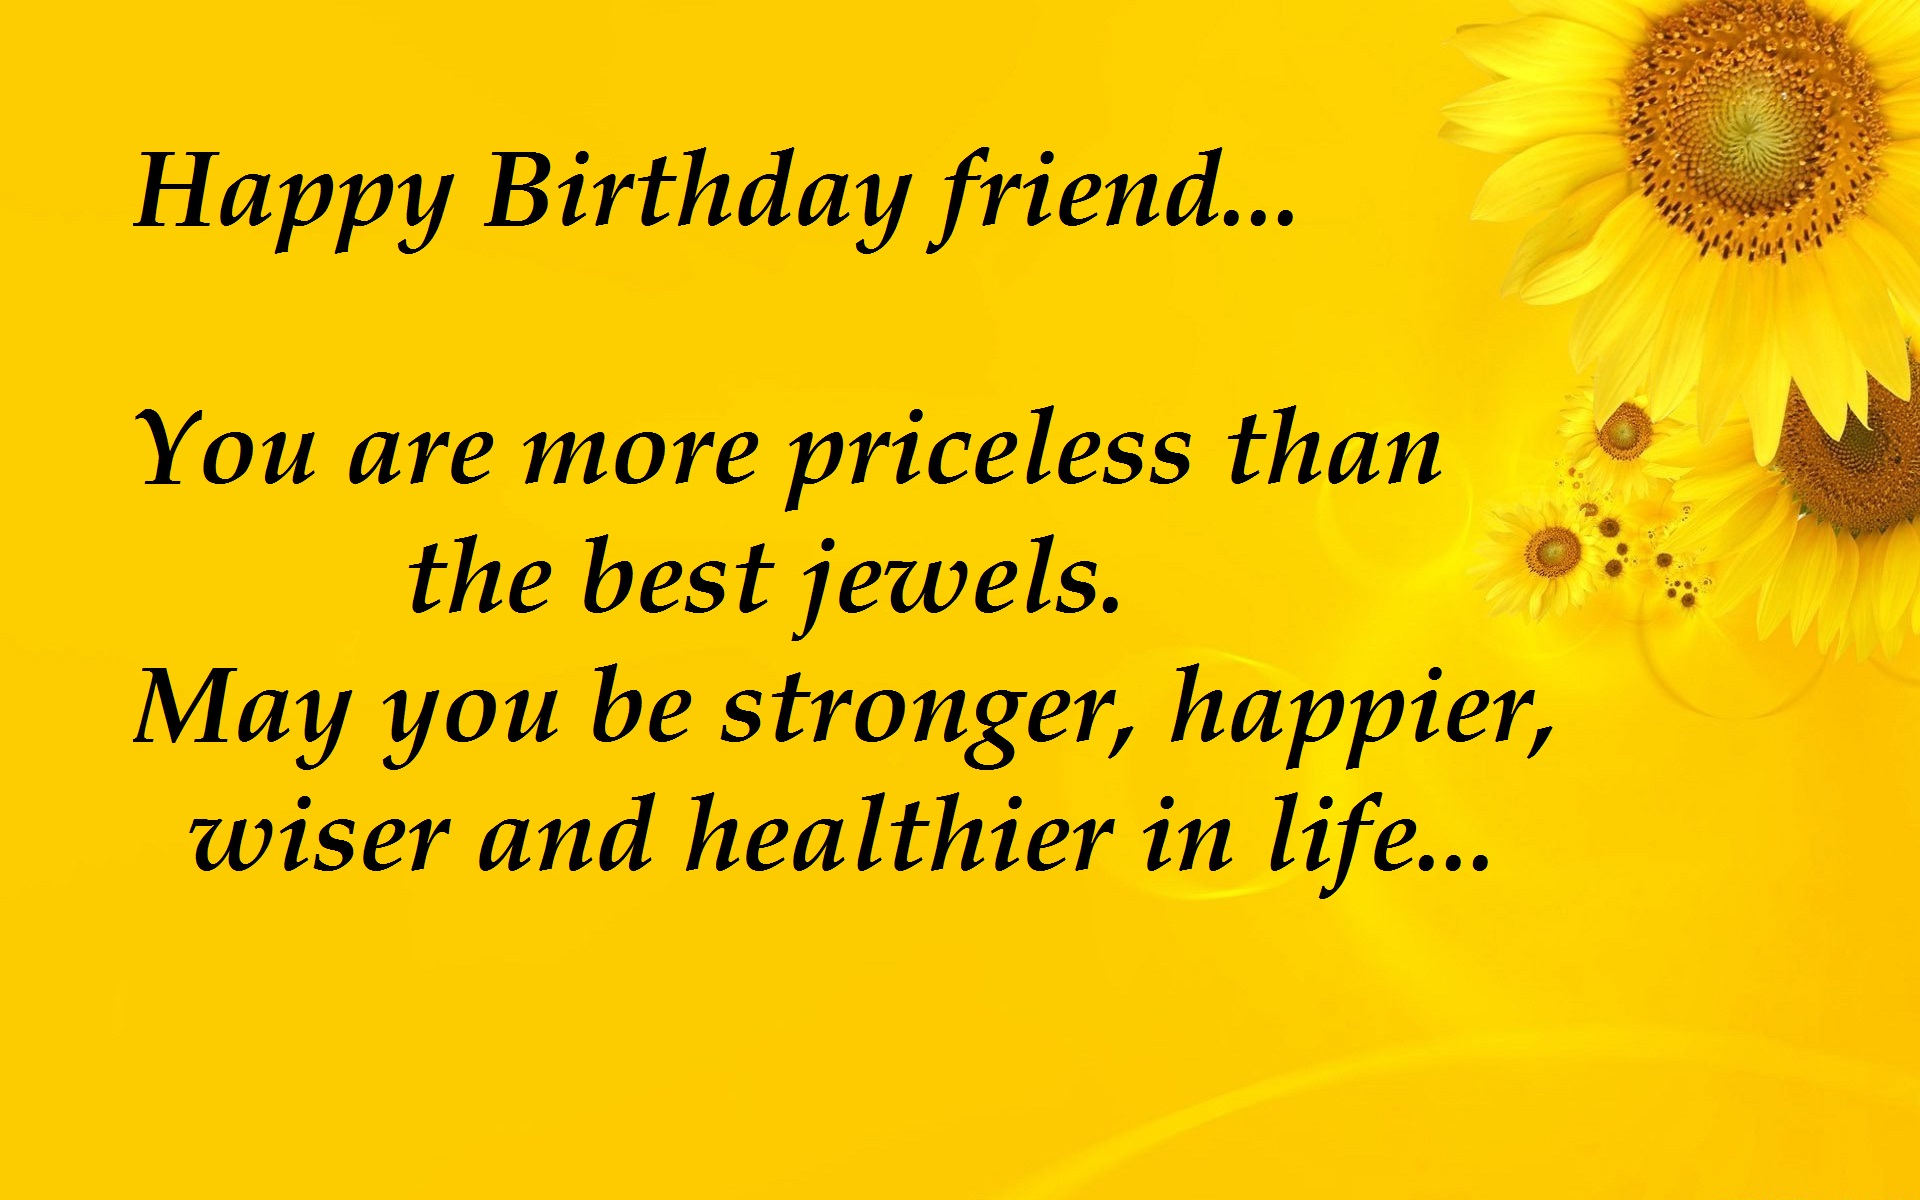 birthday messages 2017 image